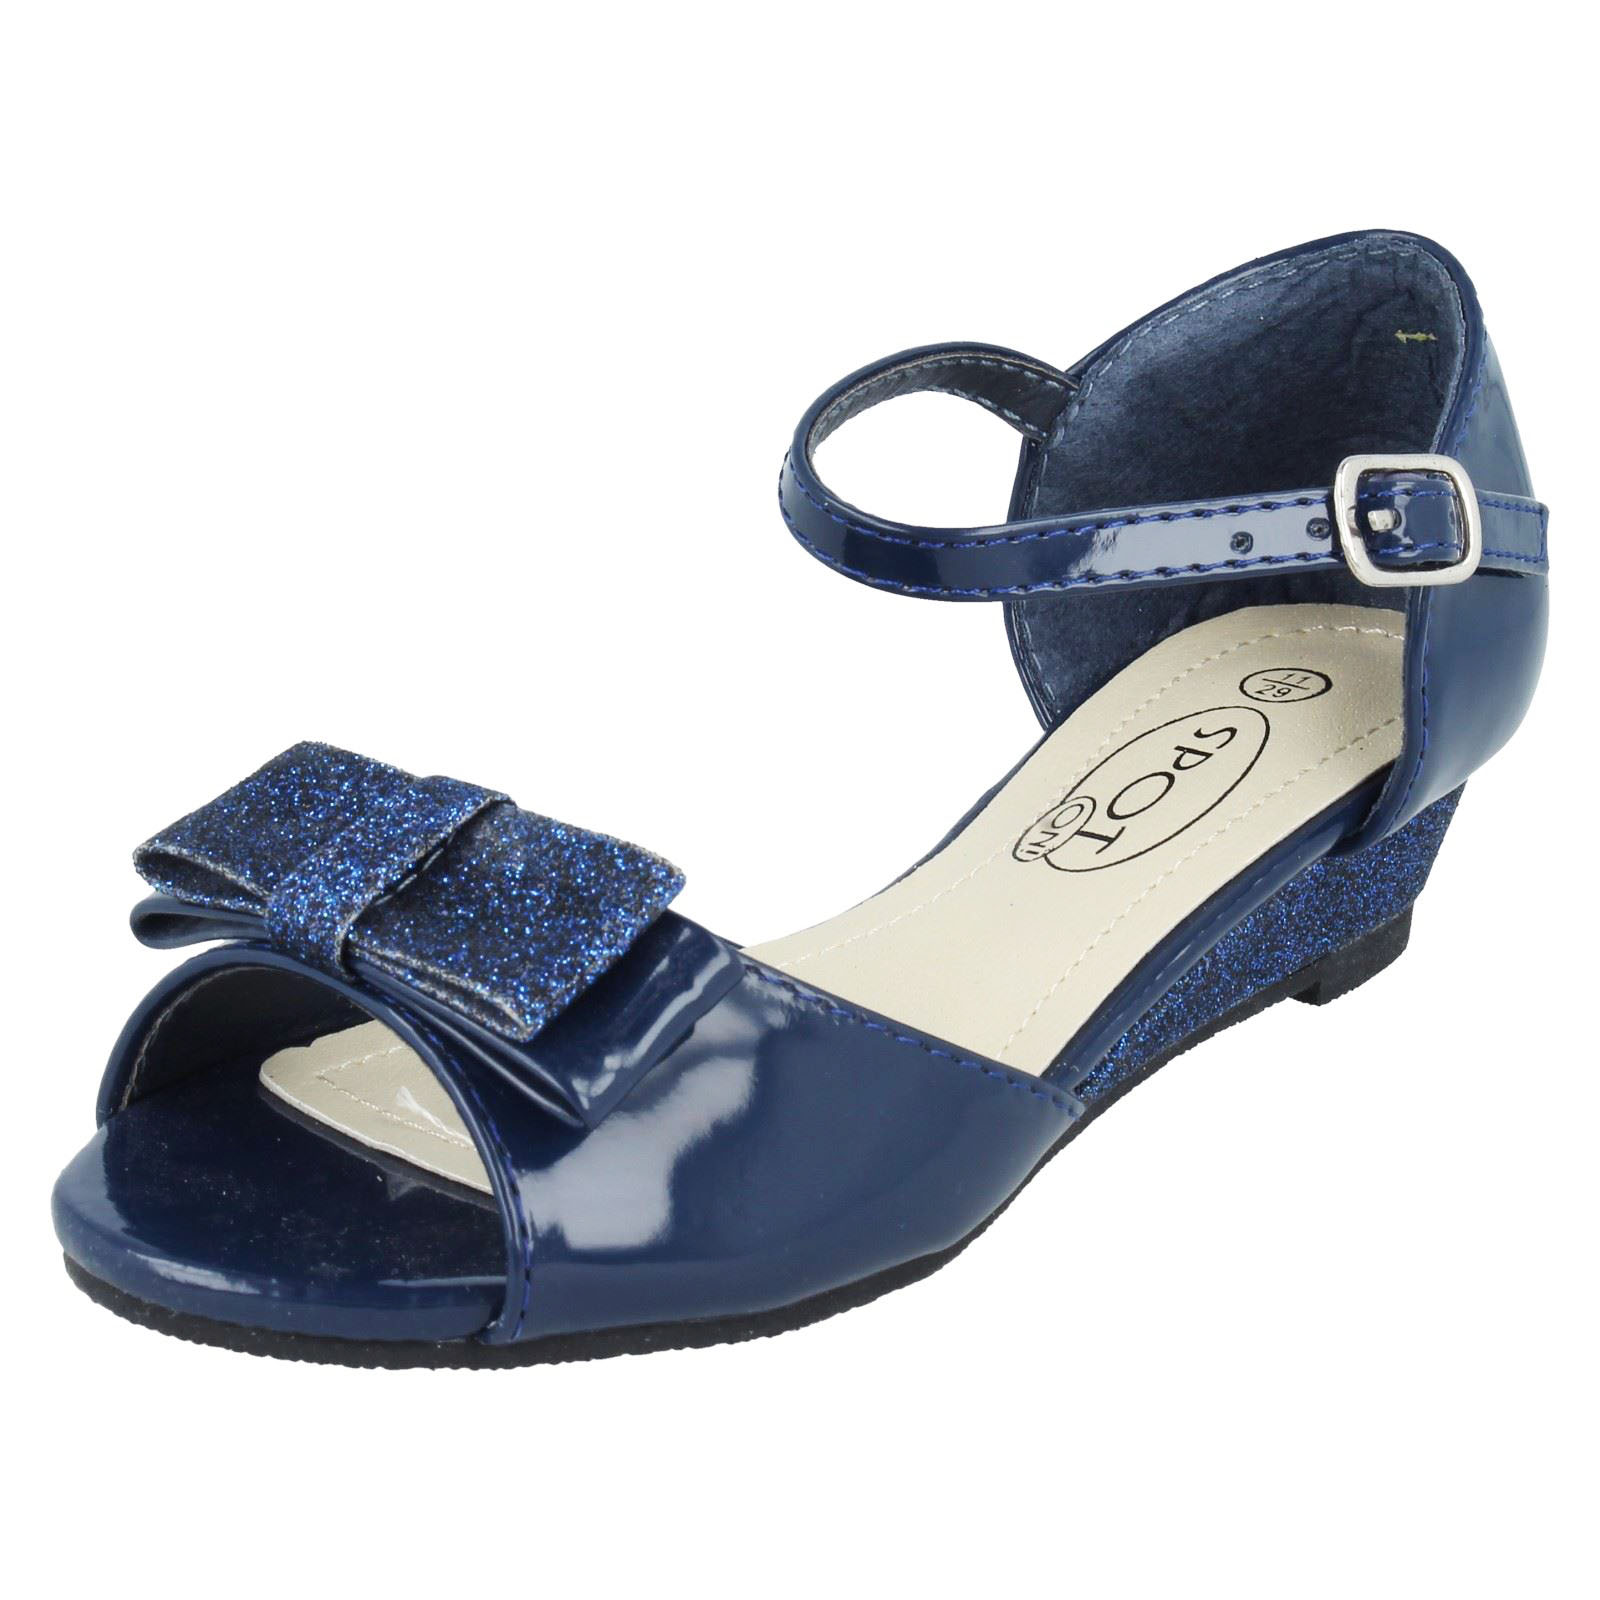 GIRLS KIDS NAVY PEEP-TOE PARTY SHOES 